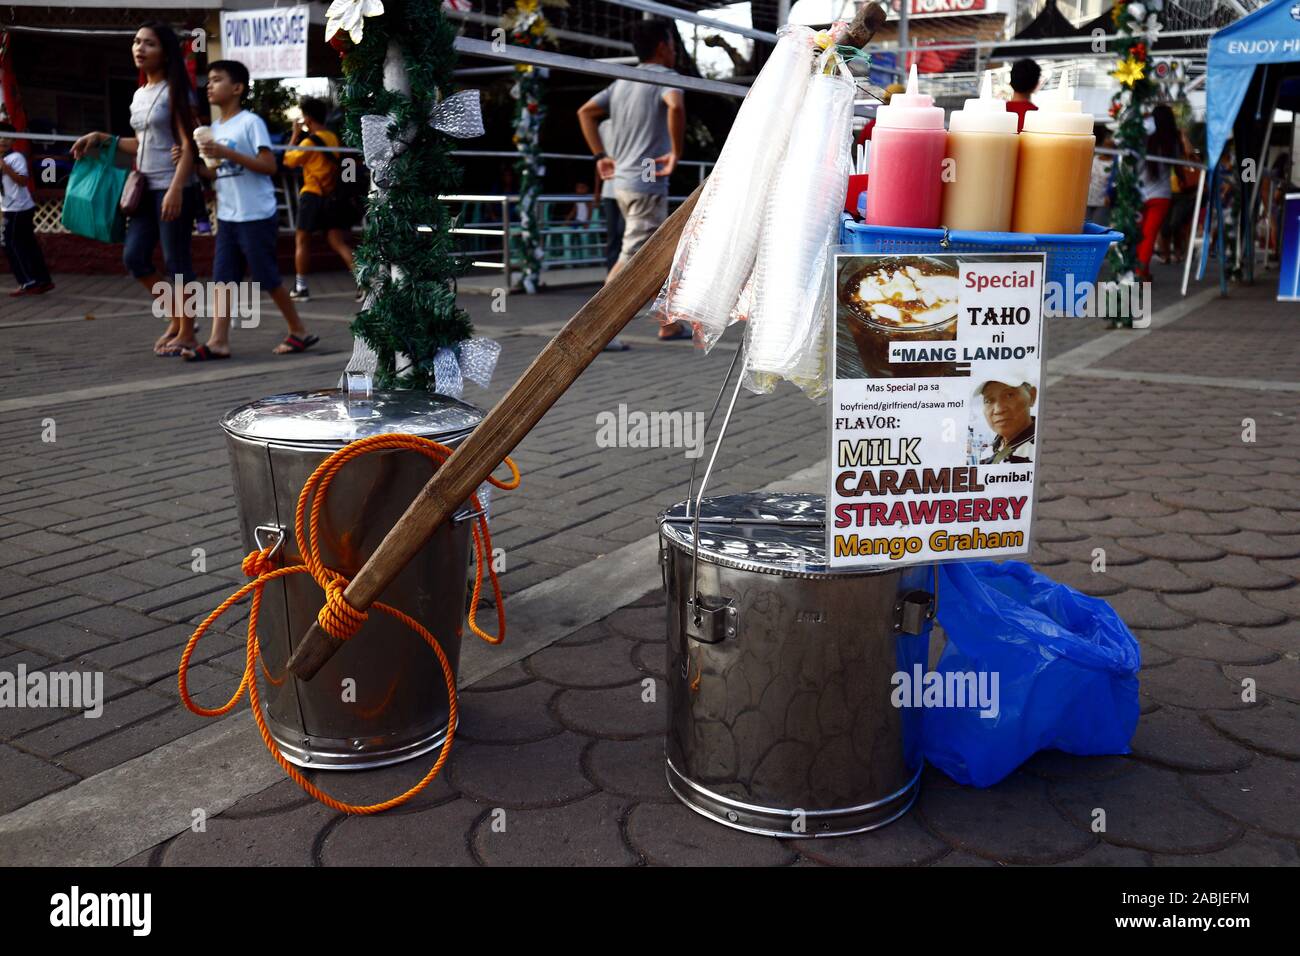 https://c8.alamy.com/comp/2ABJEFM/antipolo-city-philippines-november-26-2019-taho-or-soy-bean-curd-container-of-a-taho-vendor-at-a-public-park-2ABJEFM.jpg